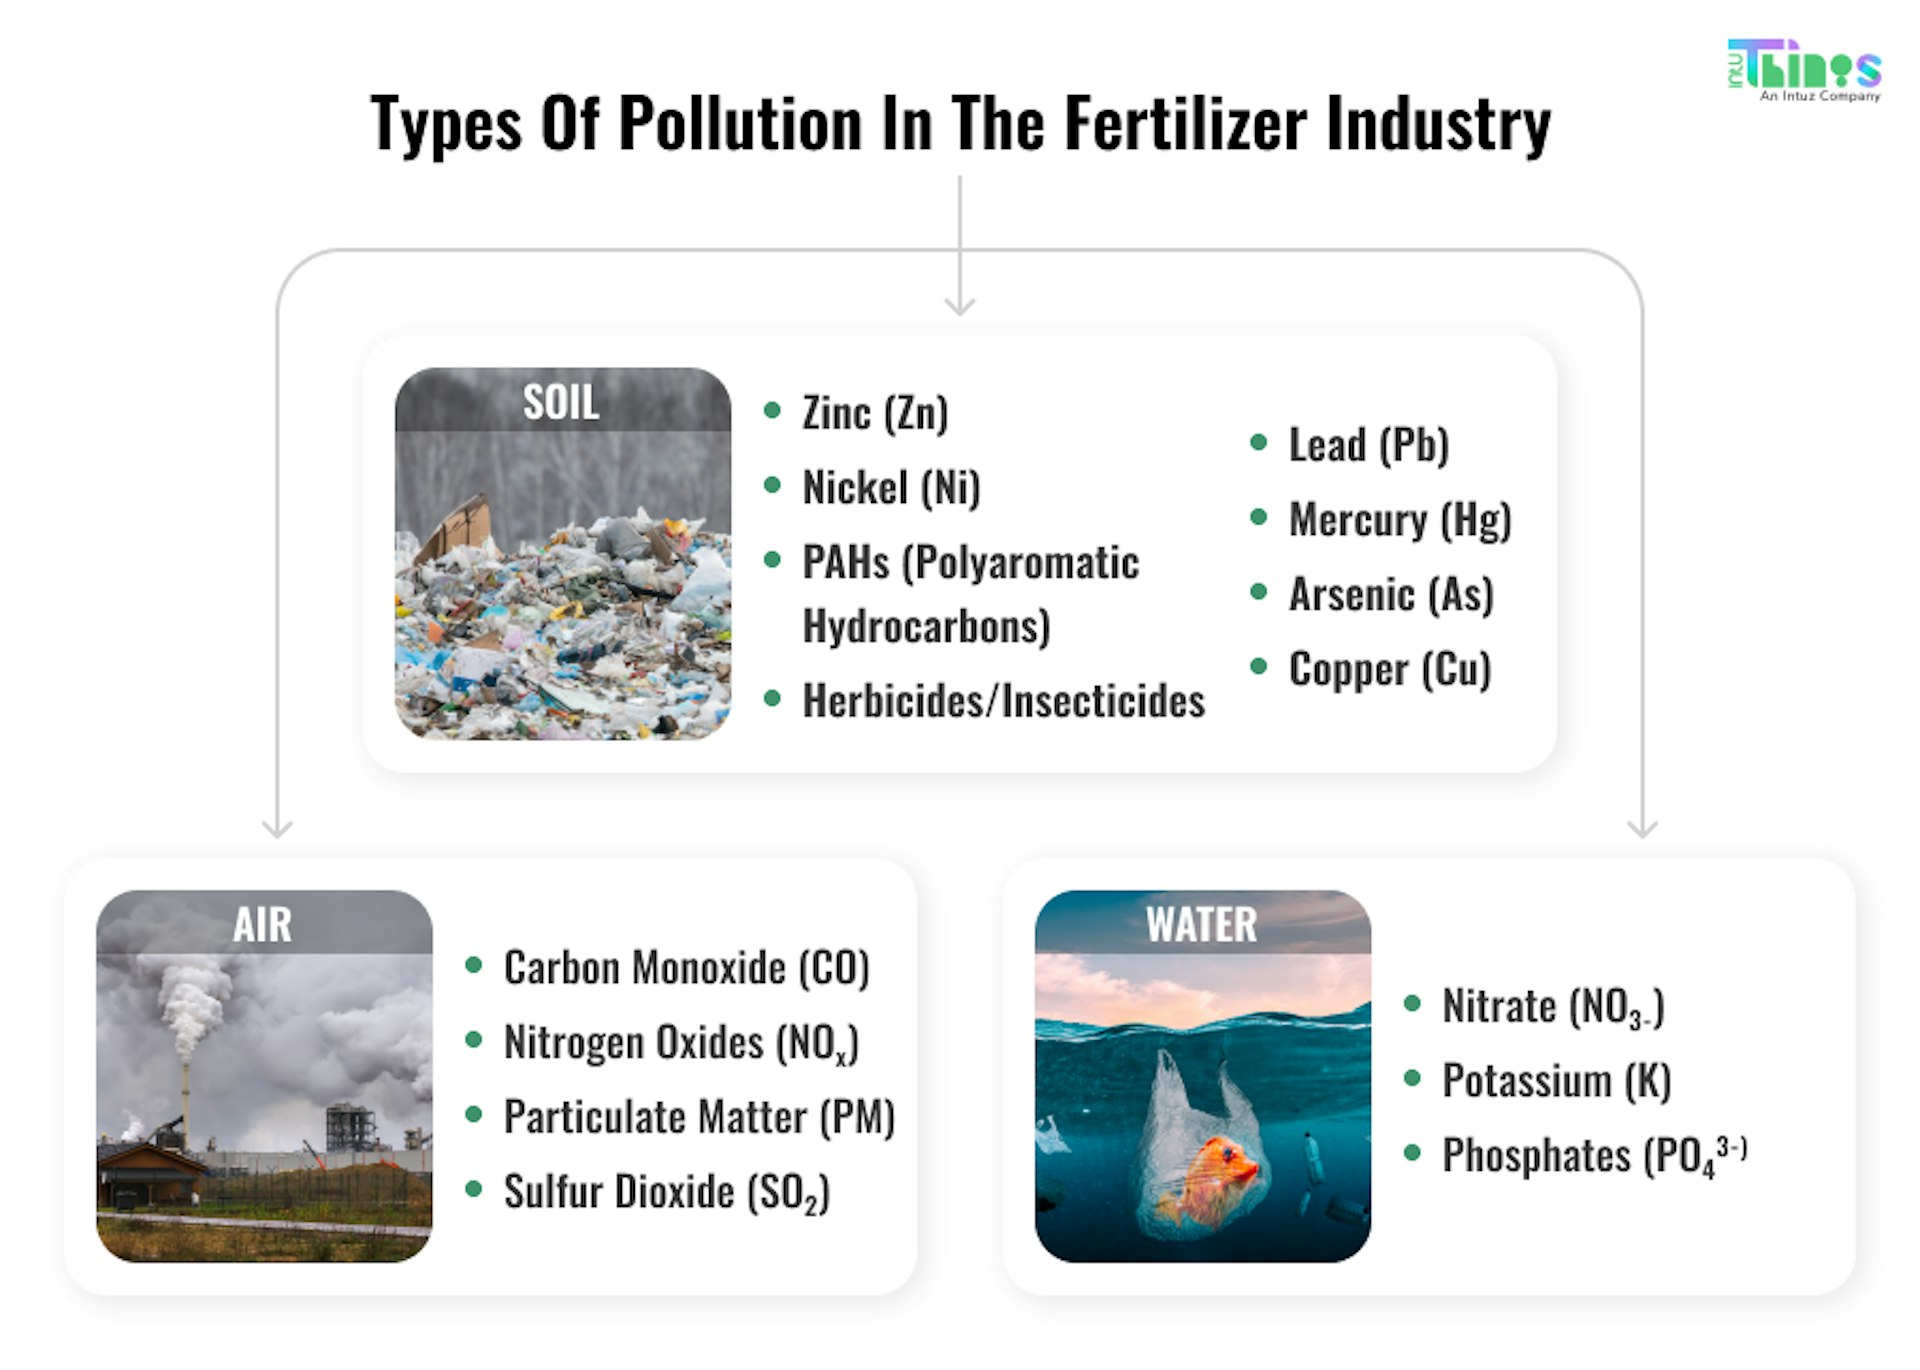 Types of pollution in the fertilizer industry